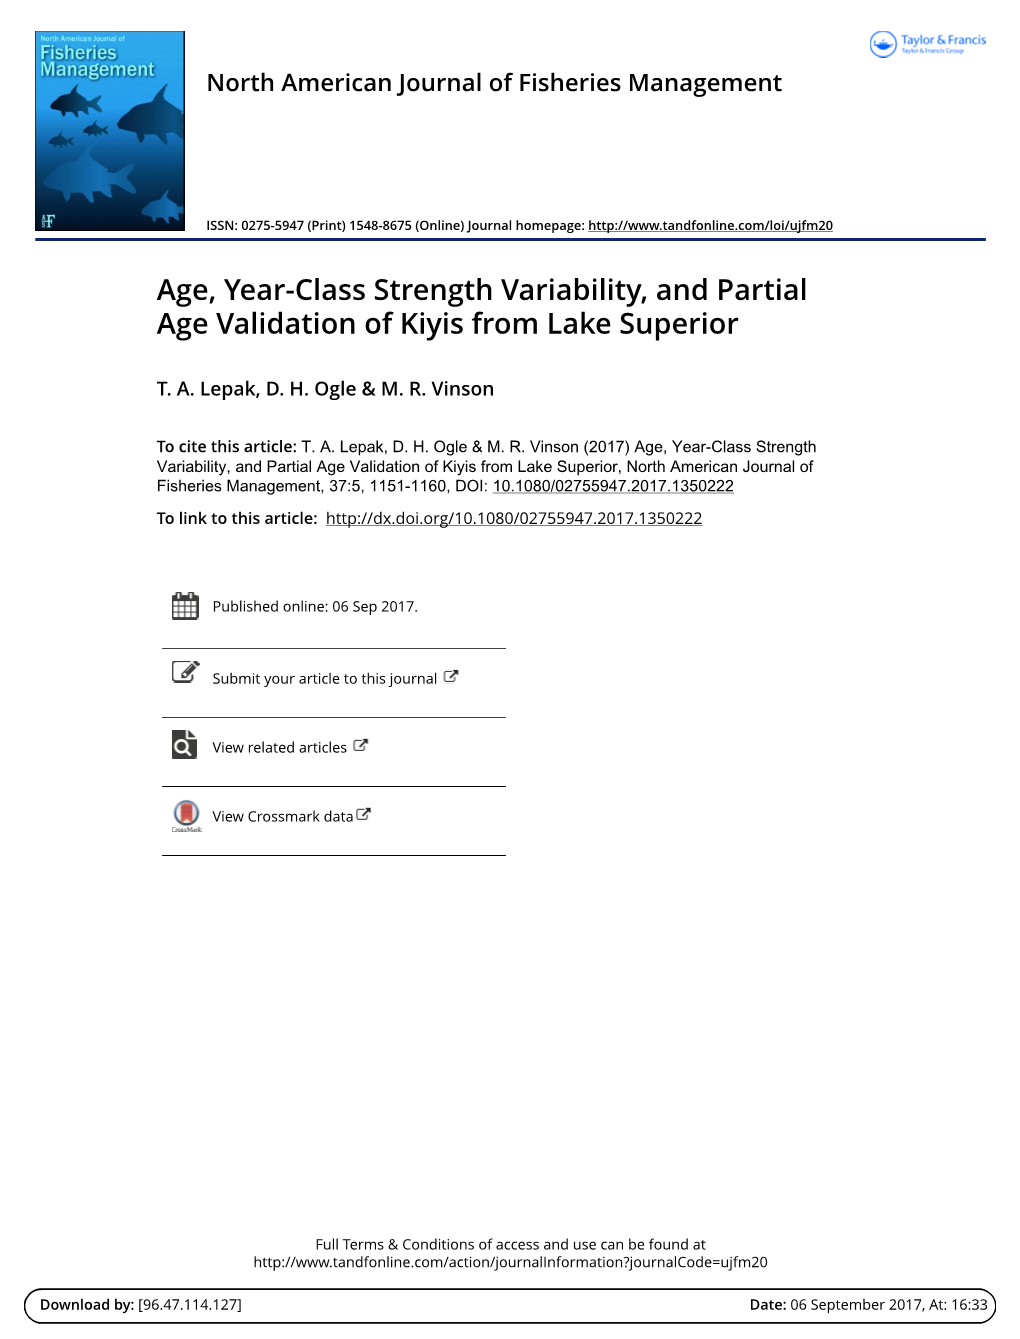 Age, Year-Class Strength Variability, and Partial Age Validation of Kiyis from Lake Superior